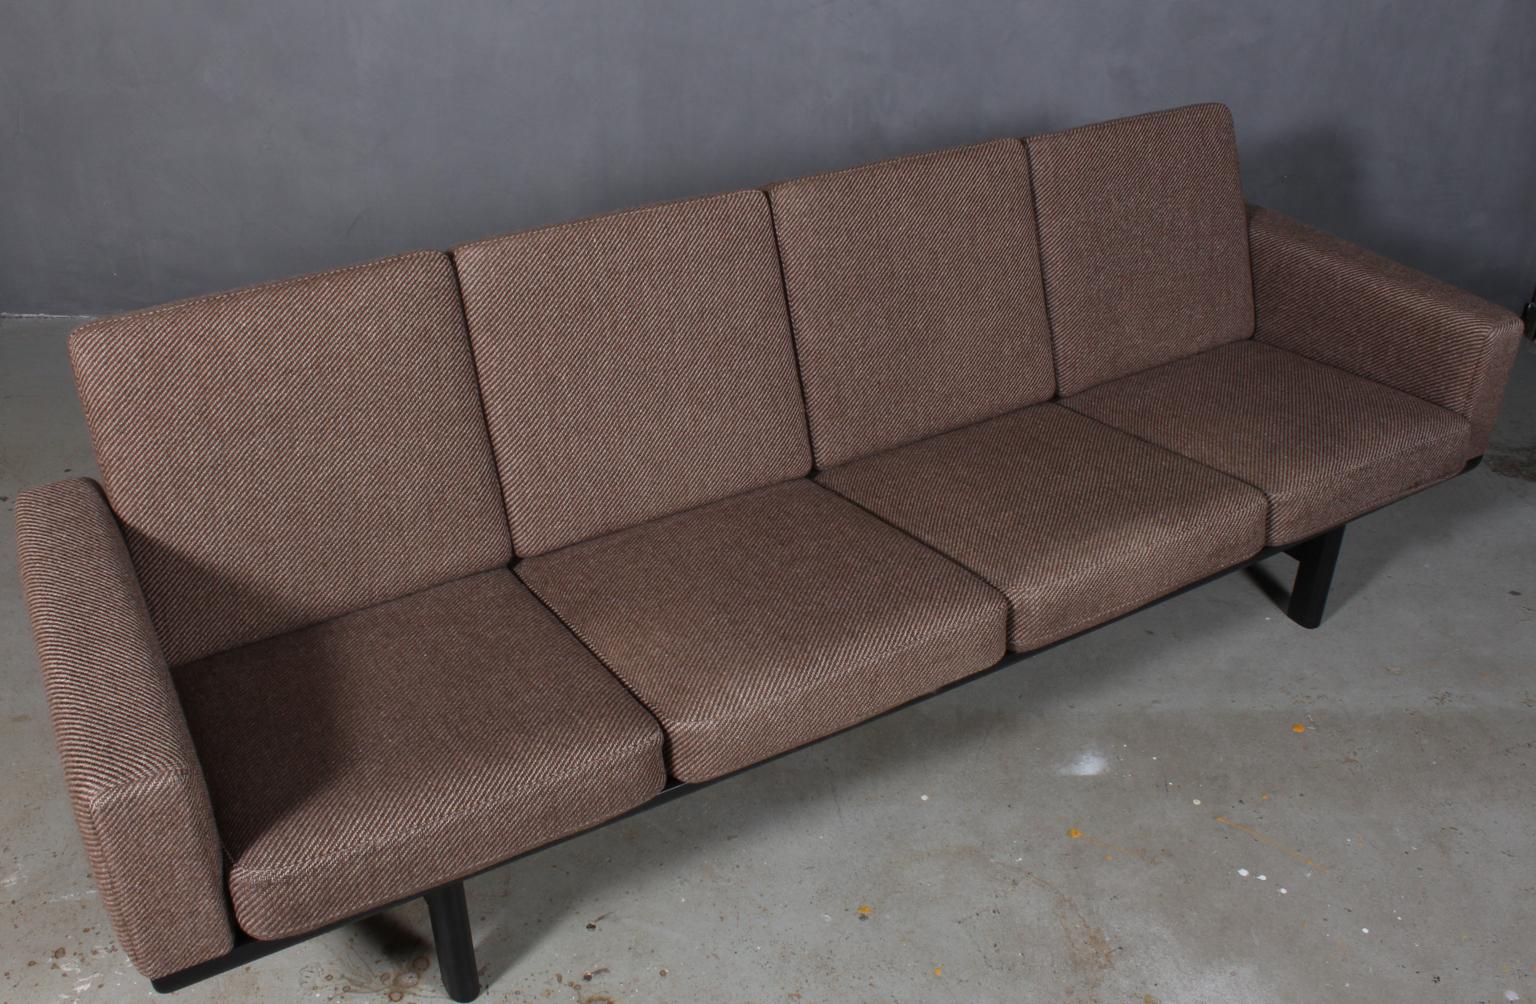 Hans J. Wegner four-seat sofa upholstered with fabric.

Original Epeda cushions.

Frame in solid dark tanned oak.

Model 236/4, produced by GETAMA.